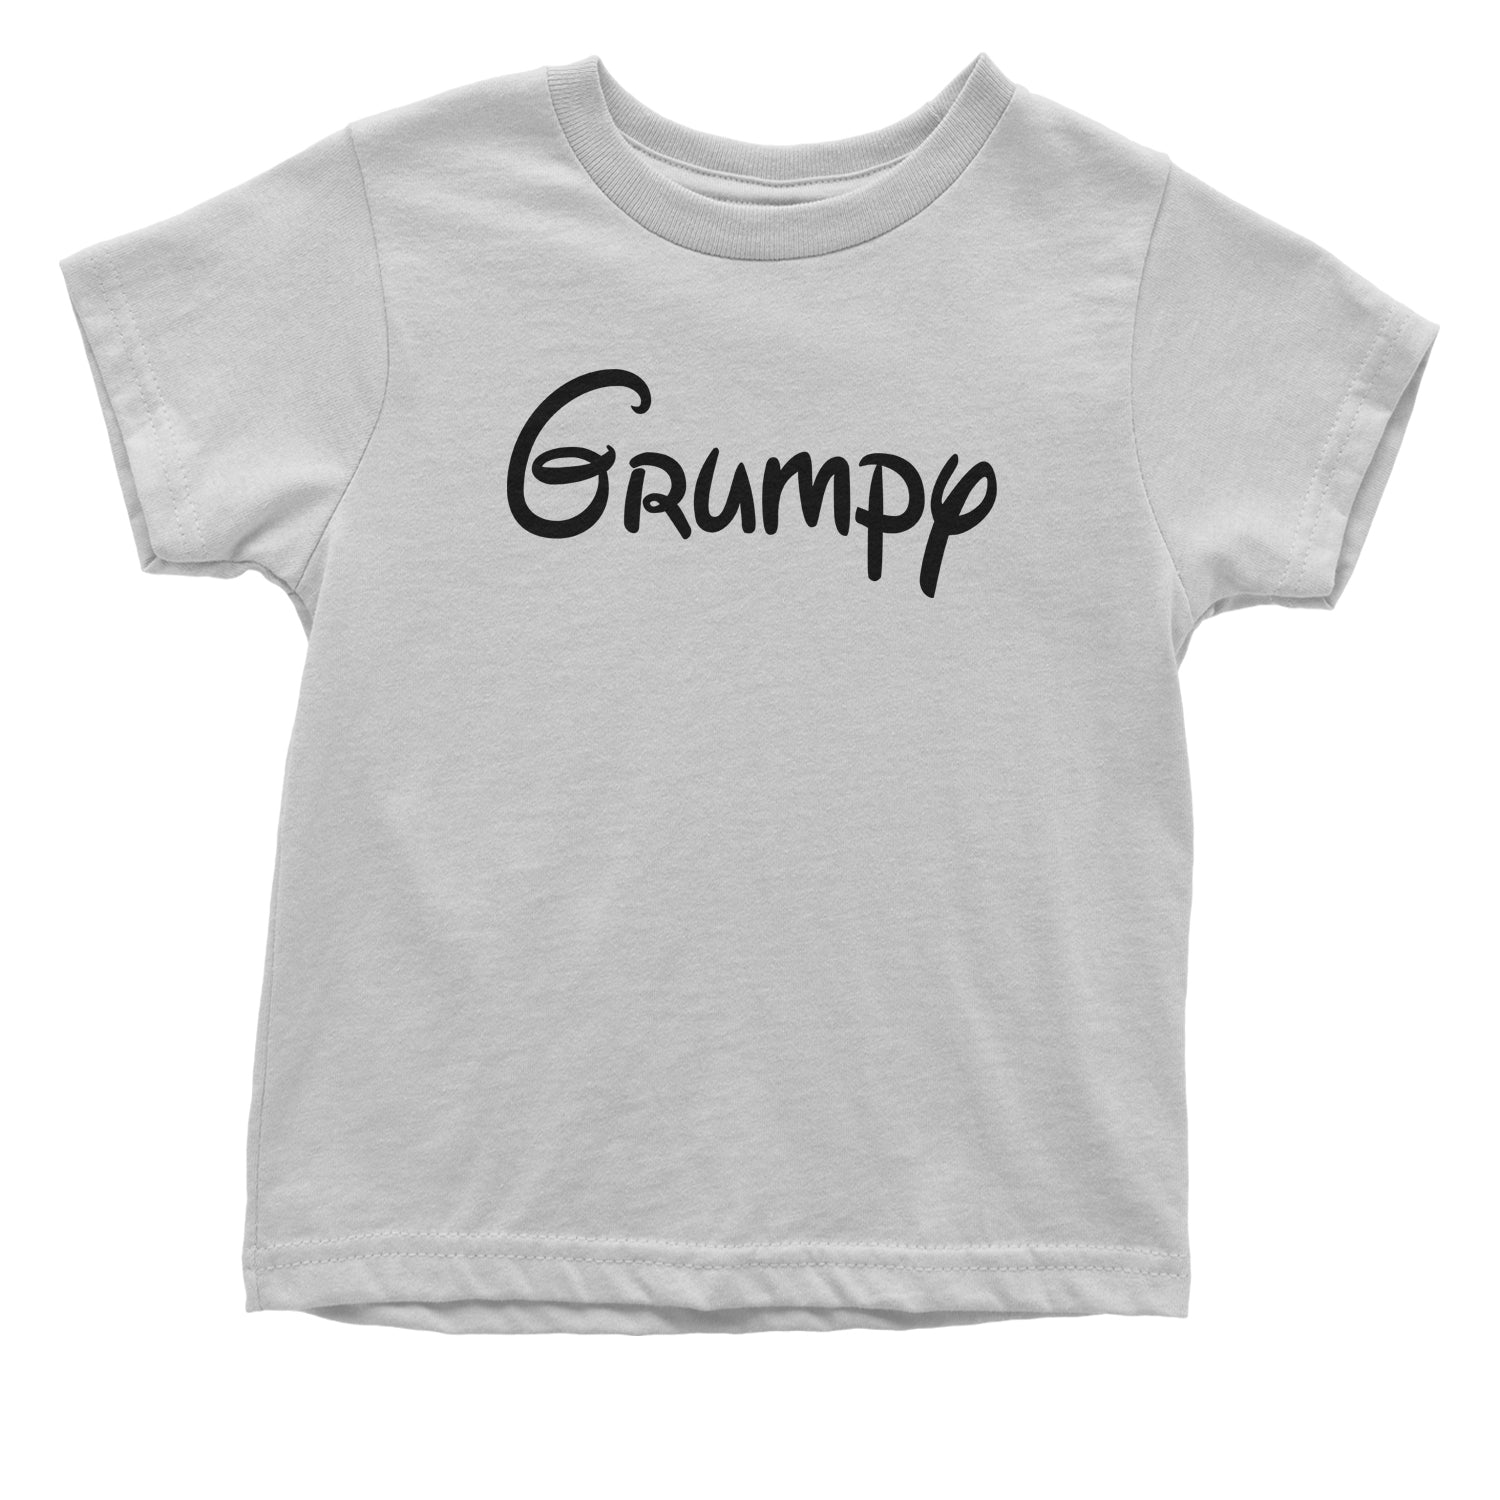 Grumpy - 7 Dwarfs Costume Toddler T-Shirt and, costume, dwarfs, group, halloween, matching, seven, snow, the, white by Expression Tees